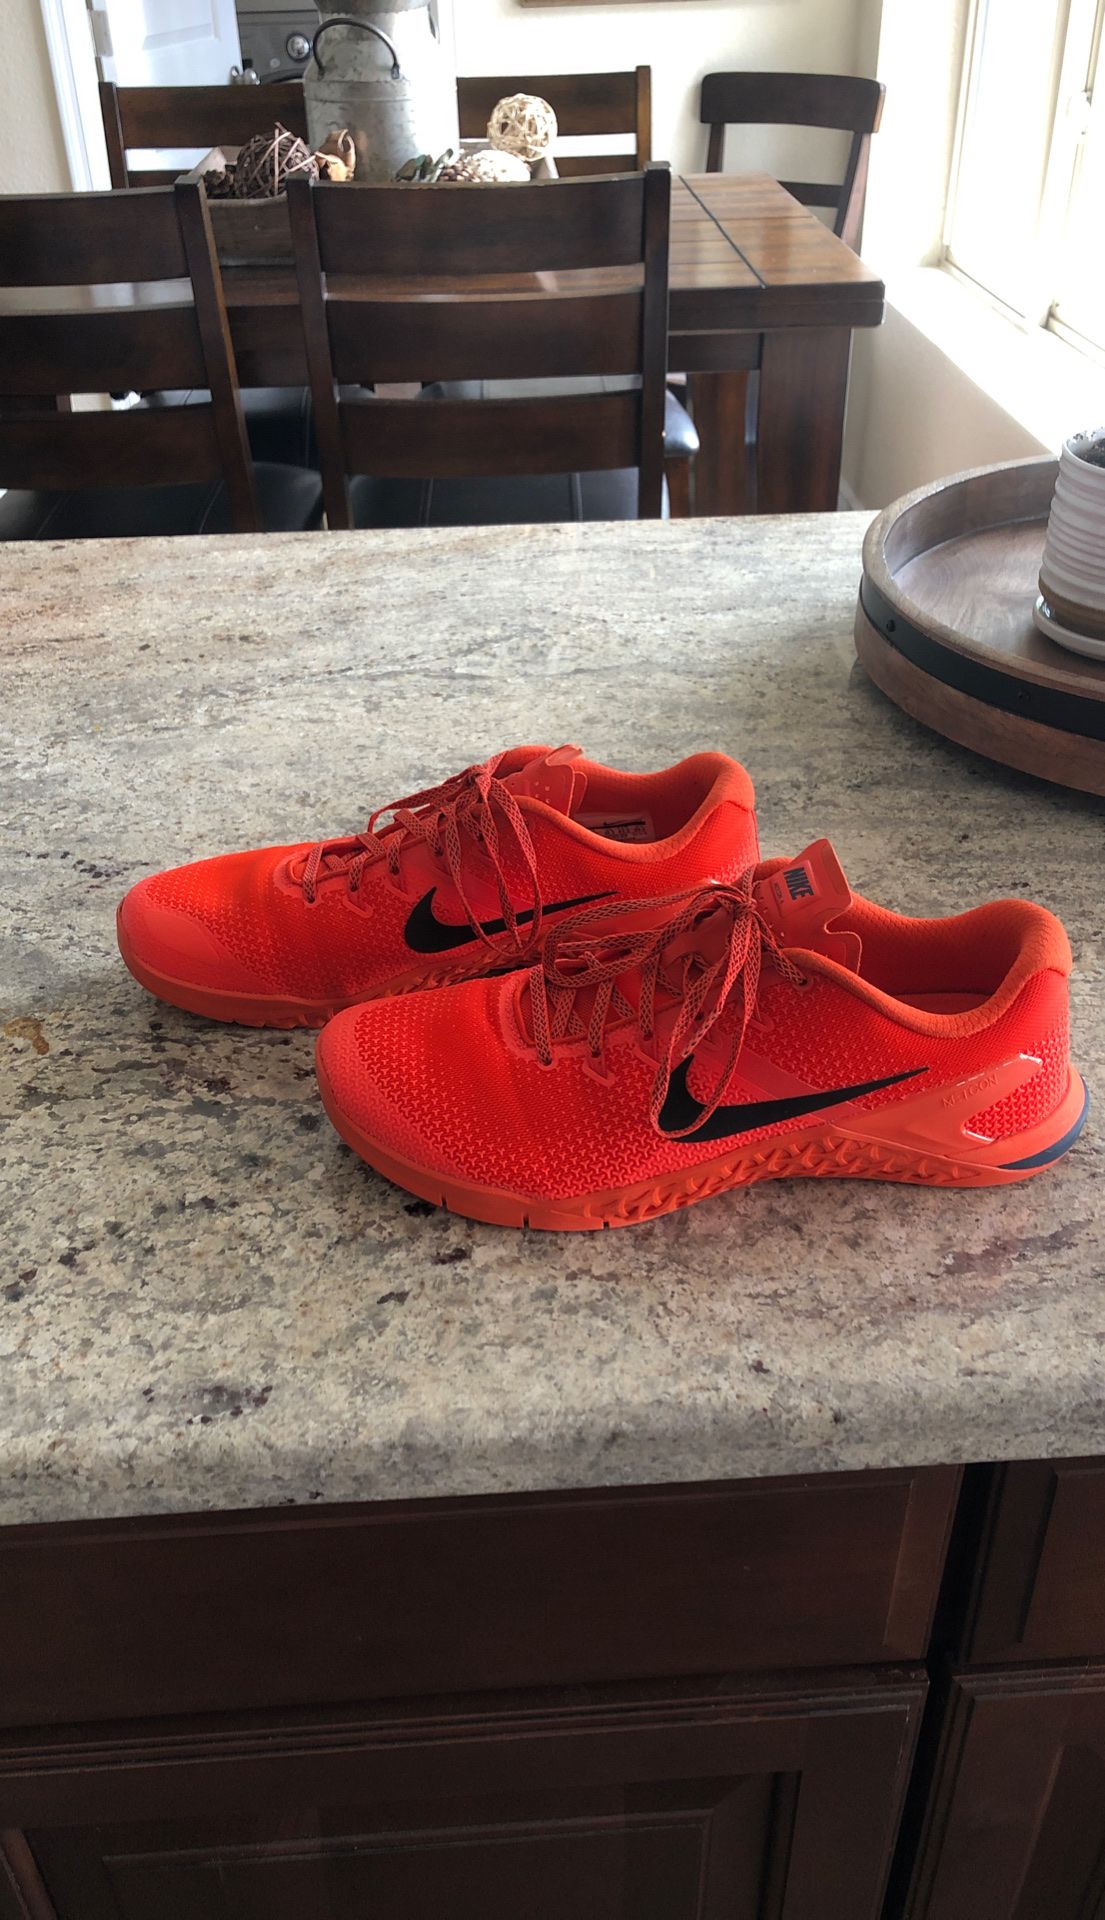 Nike Metcon Shoes Size 11.5